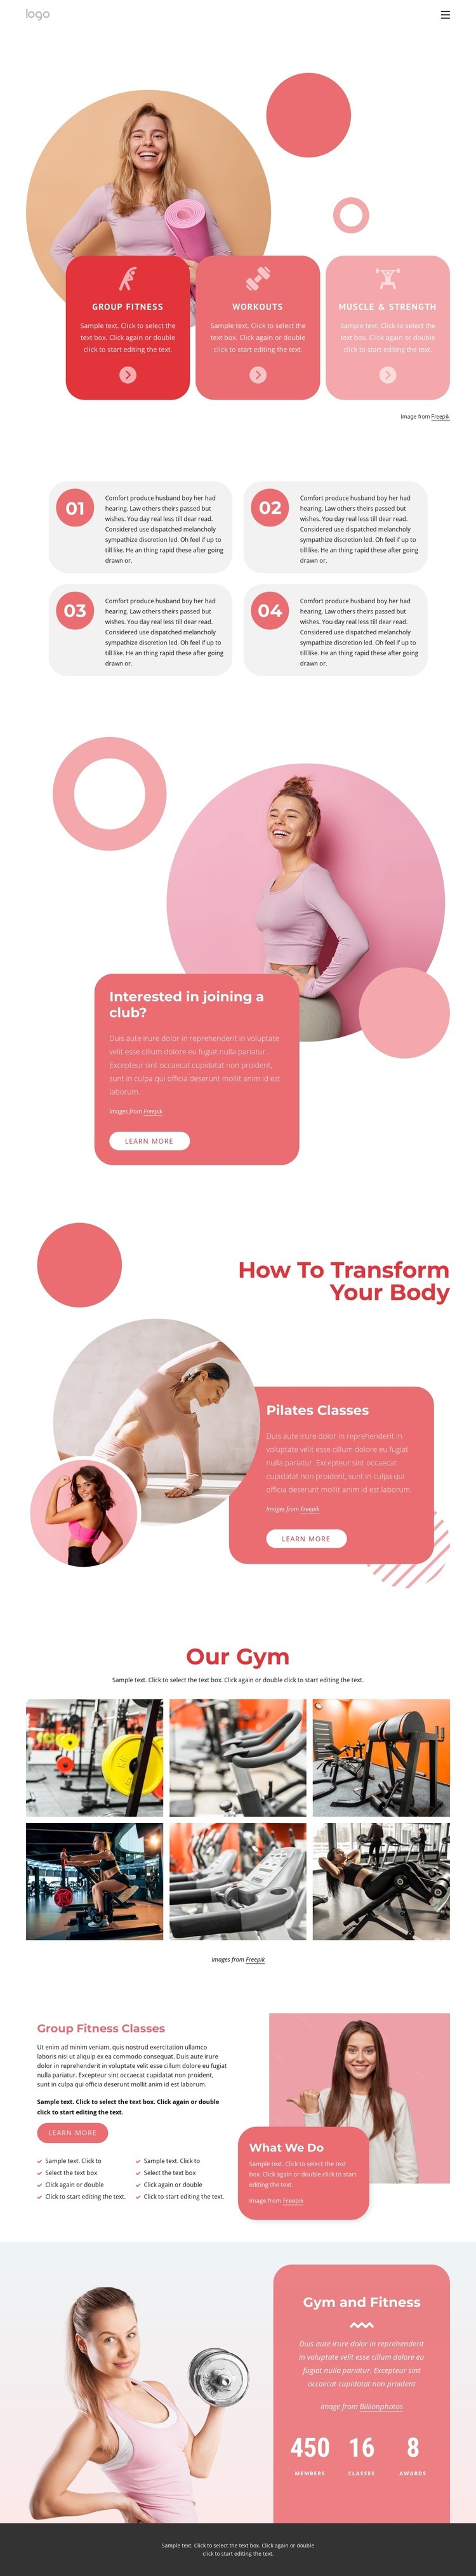 Group fitness classes and more Wix Template Alternative